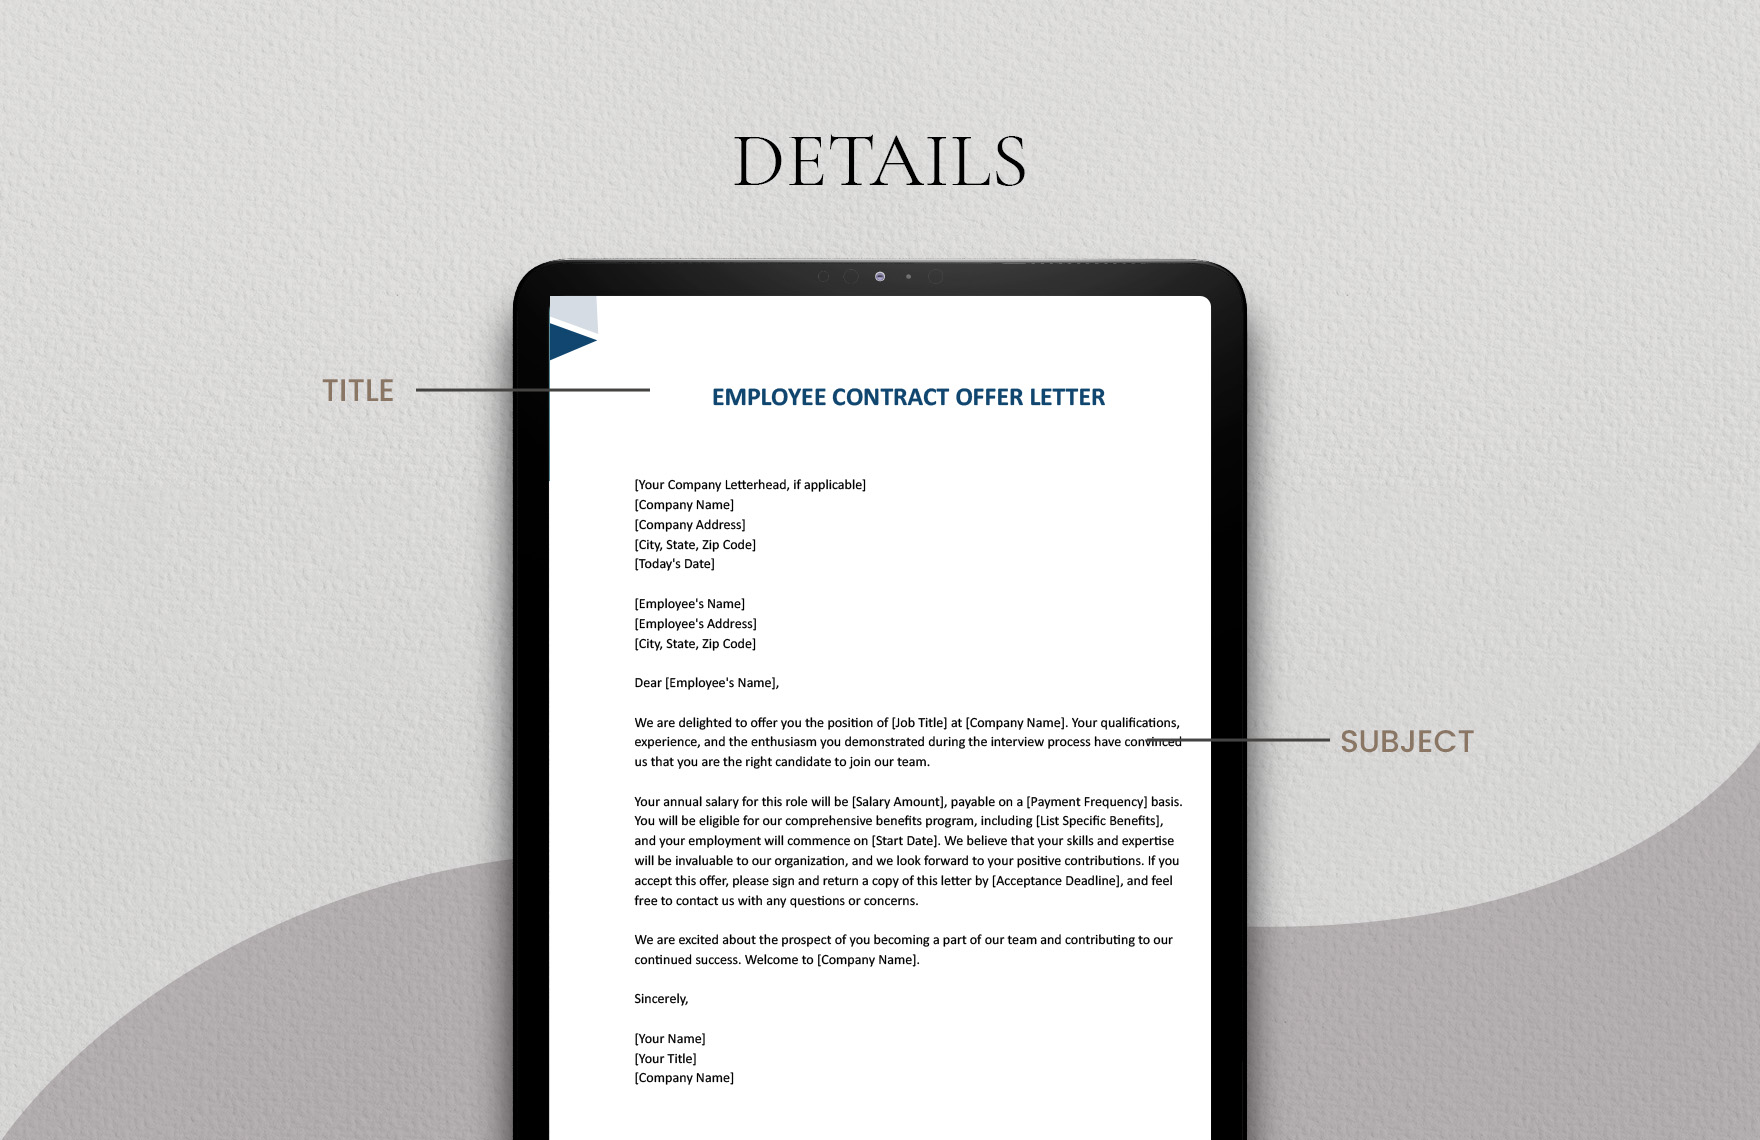 Employee Contract Offer Letter